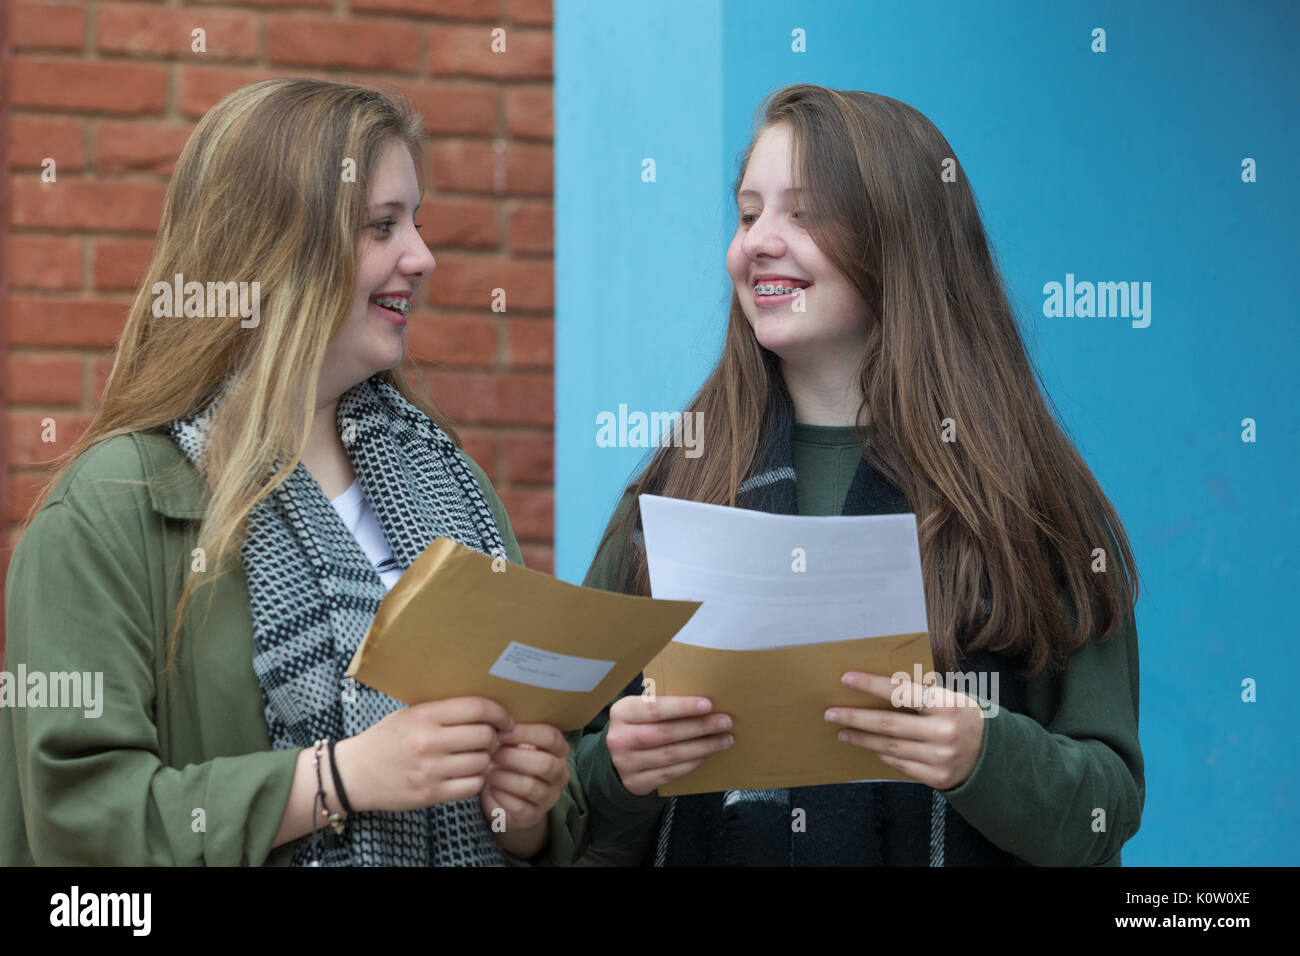 Bromsgrove, Worcs, UK. 24th Aug, 2017. 16-year-old twins Siobhan and Danni Farrell opening their results at North Bromsgrove High School, Bromsgrove, Worcs UK. Credit: Peter Lopeman/Alamy Live News Stock Photo